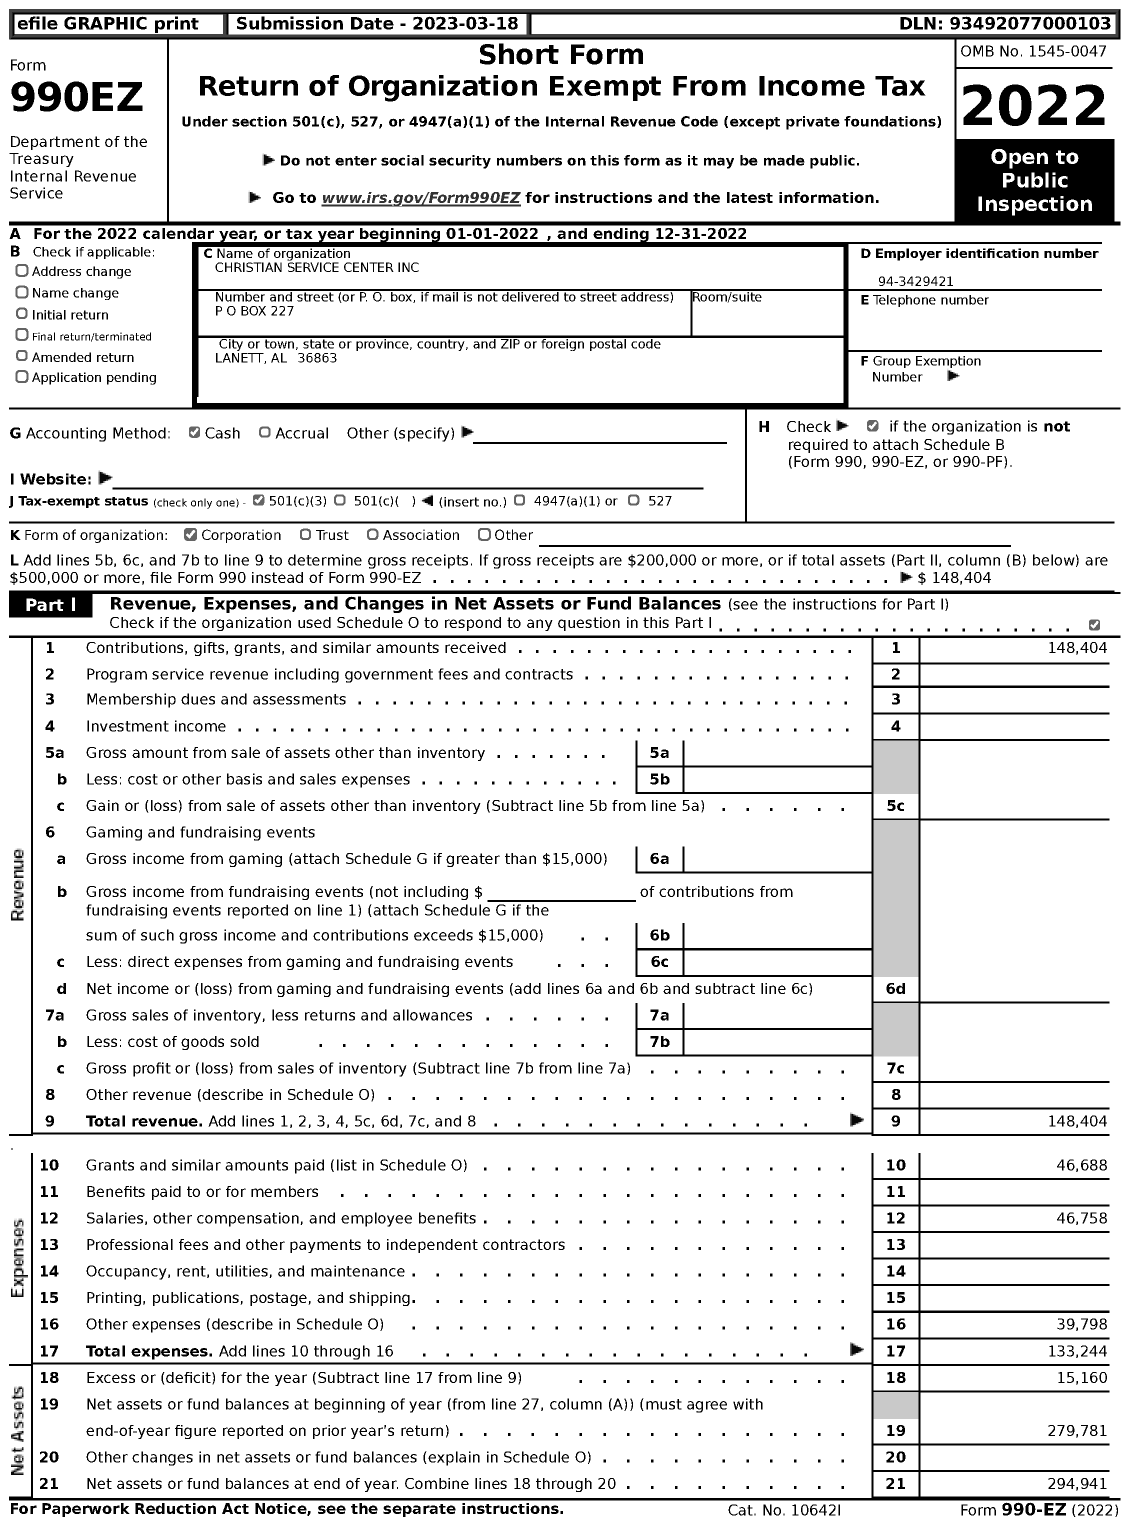 Image of first page of 2022 Form 990EZ for Christian Service Center